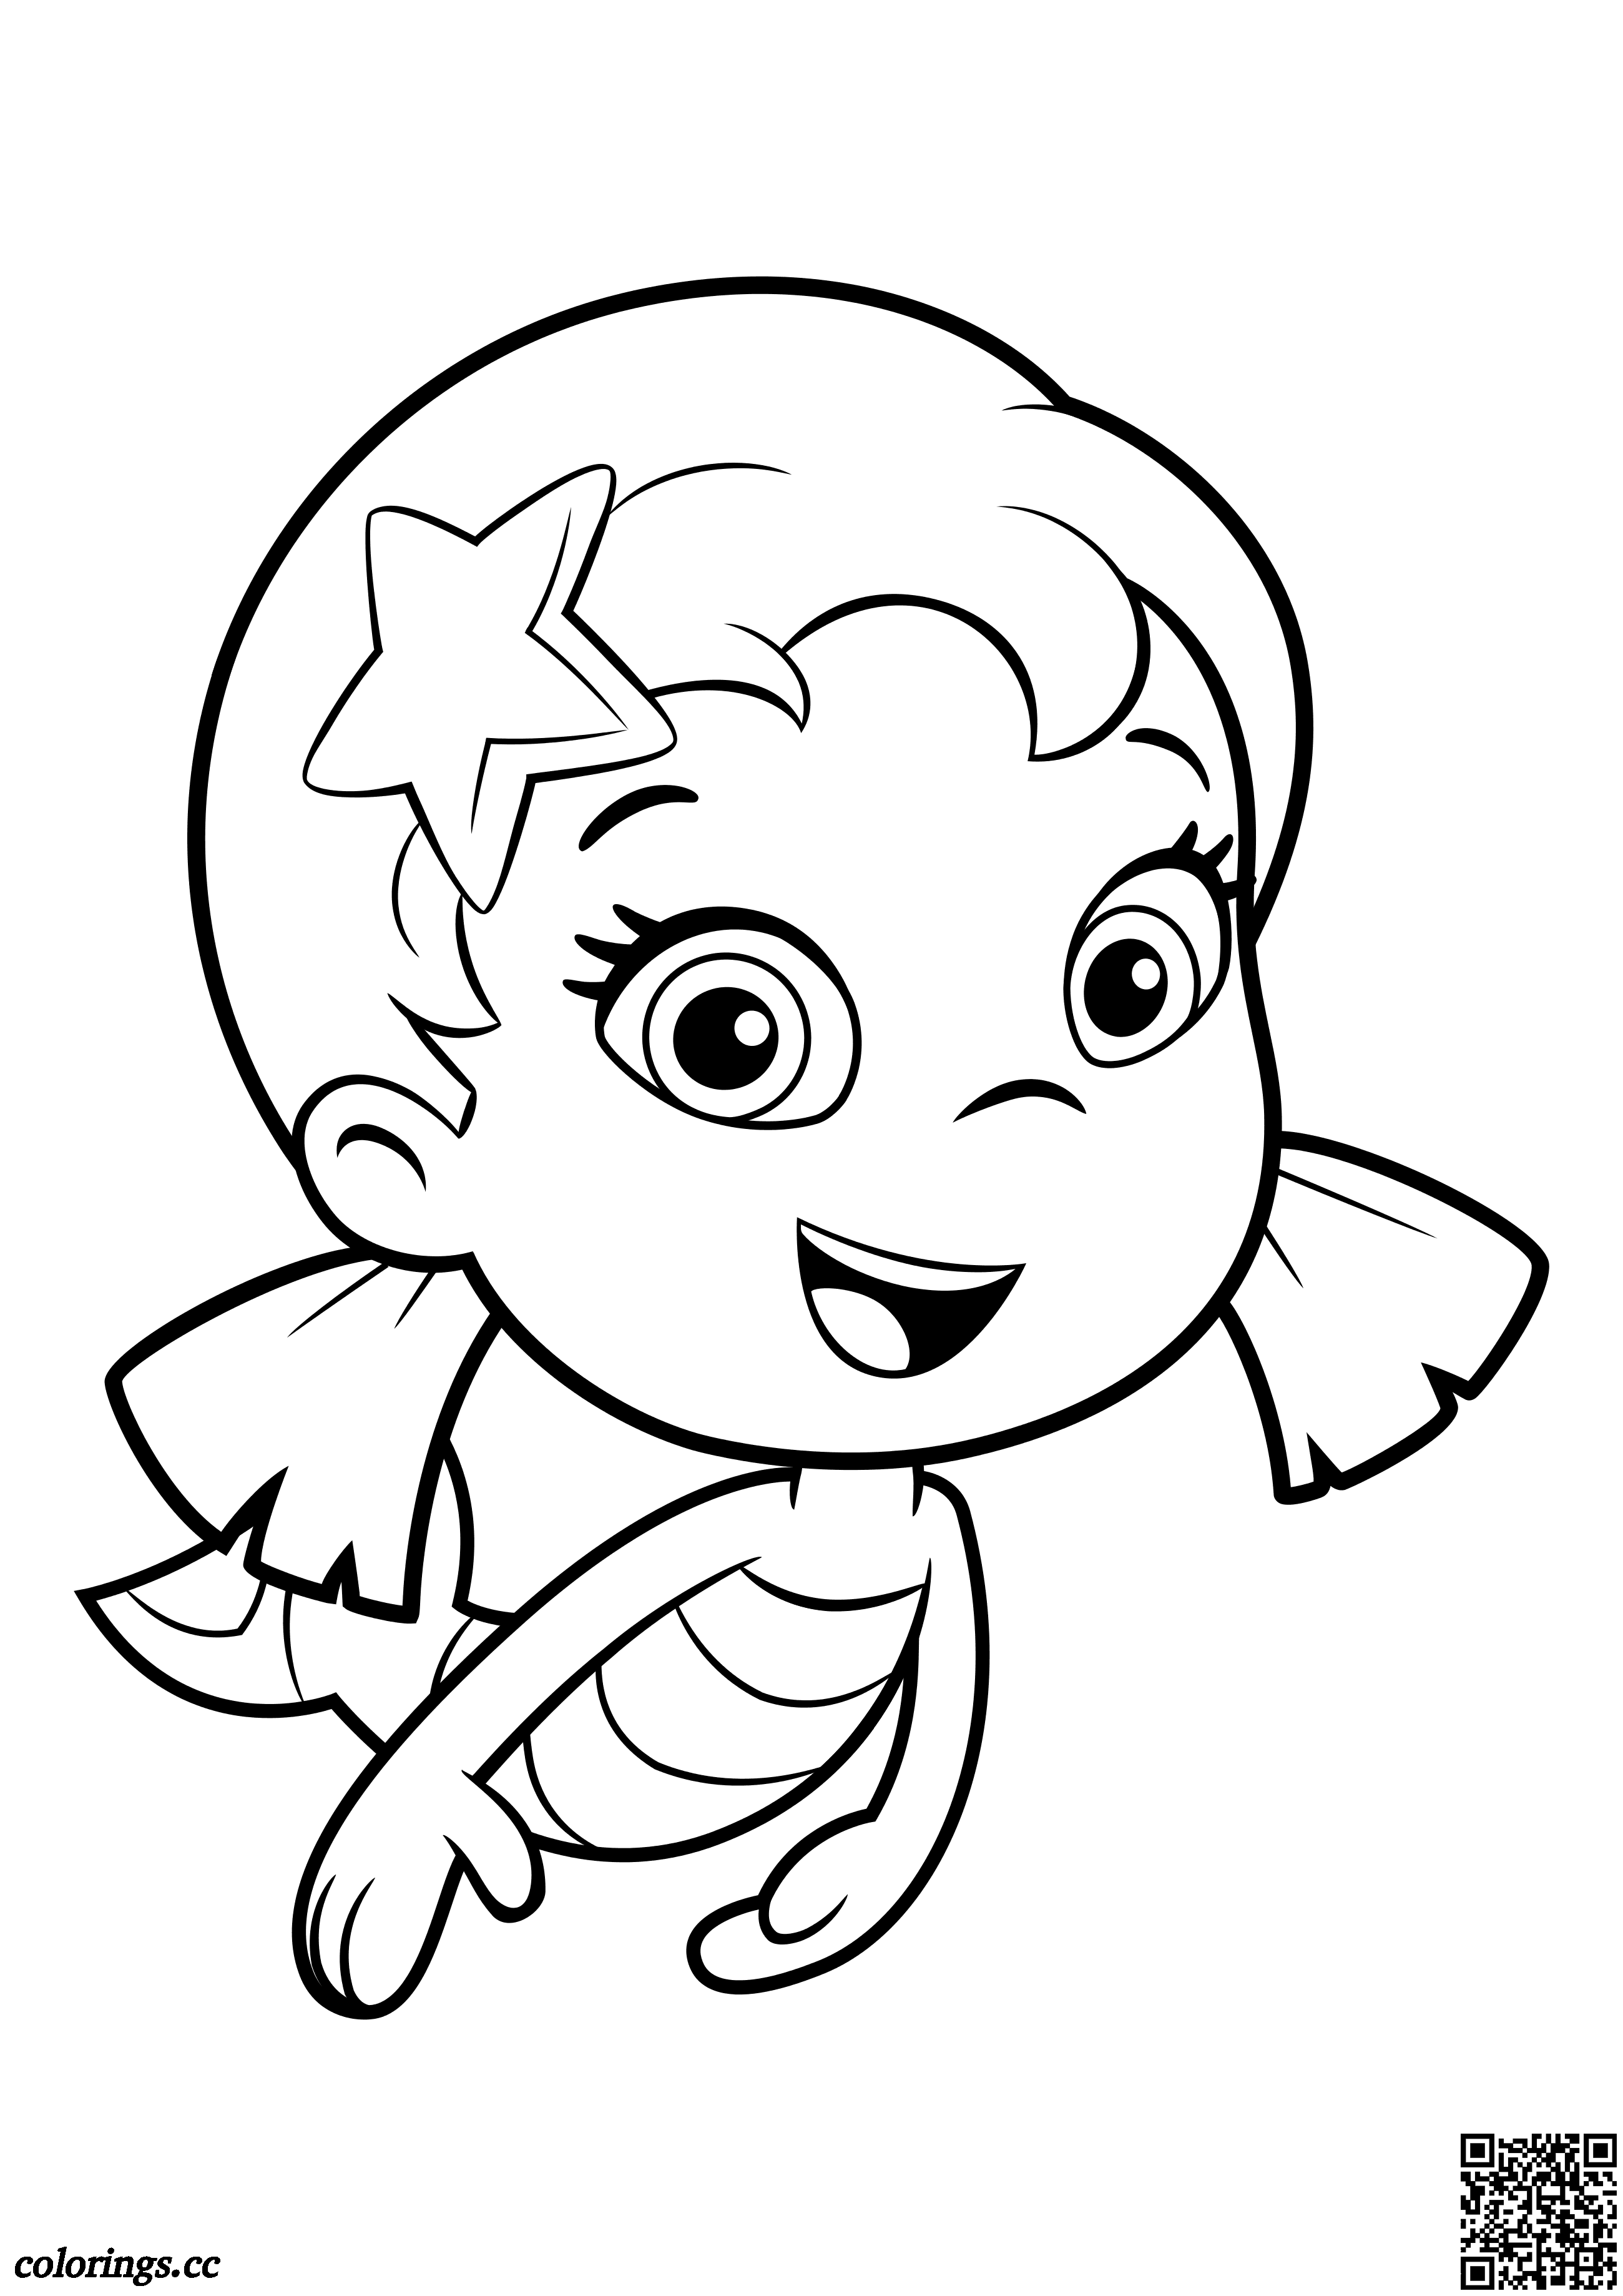 Shy Oona coloring pages, Guppies and bubbles coloring pages ...